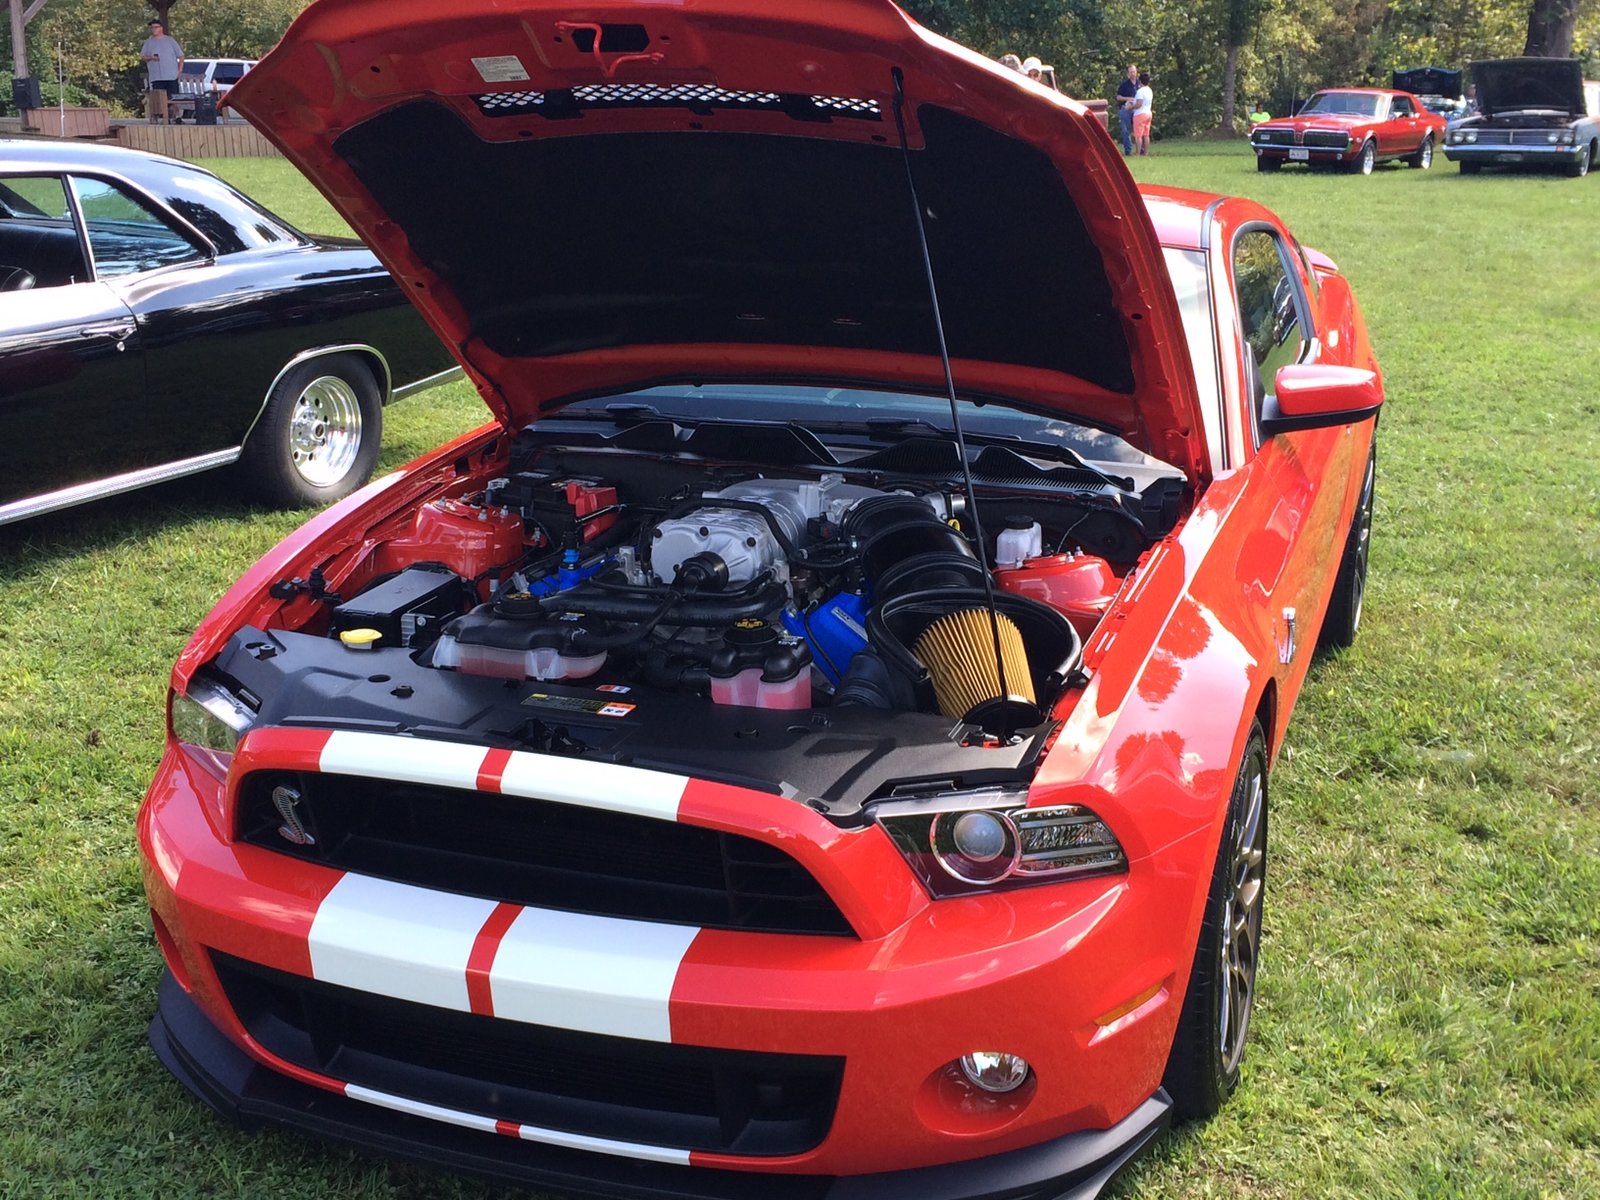 Shelby front.jpg